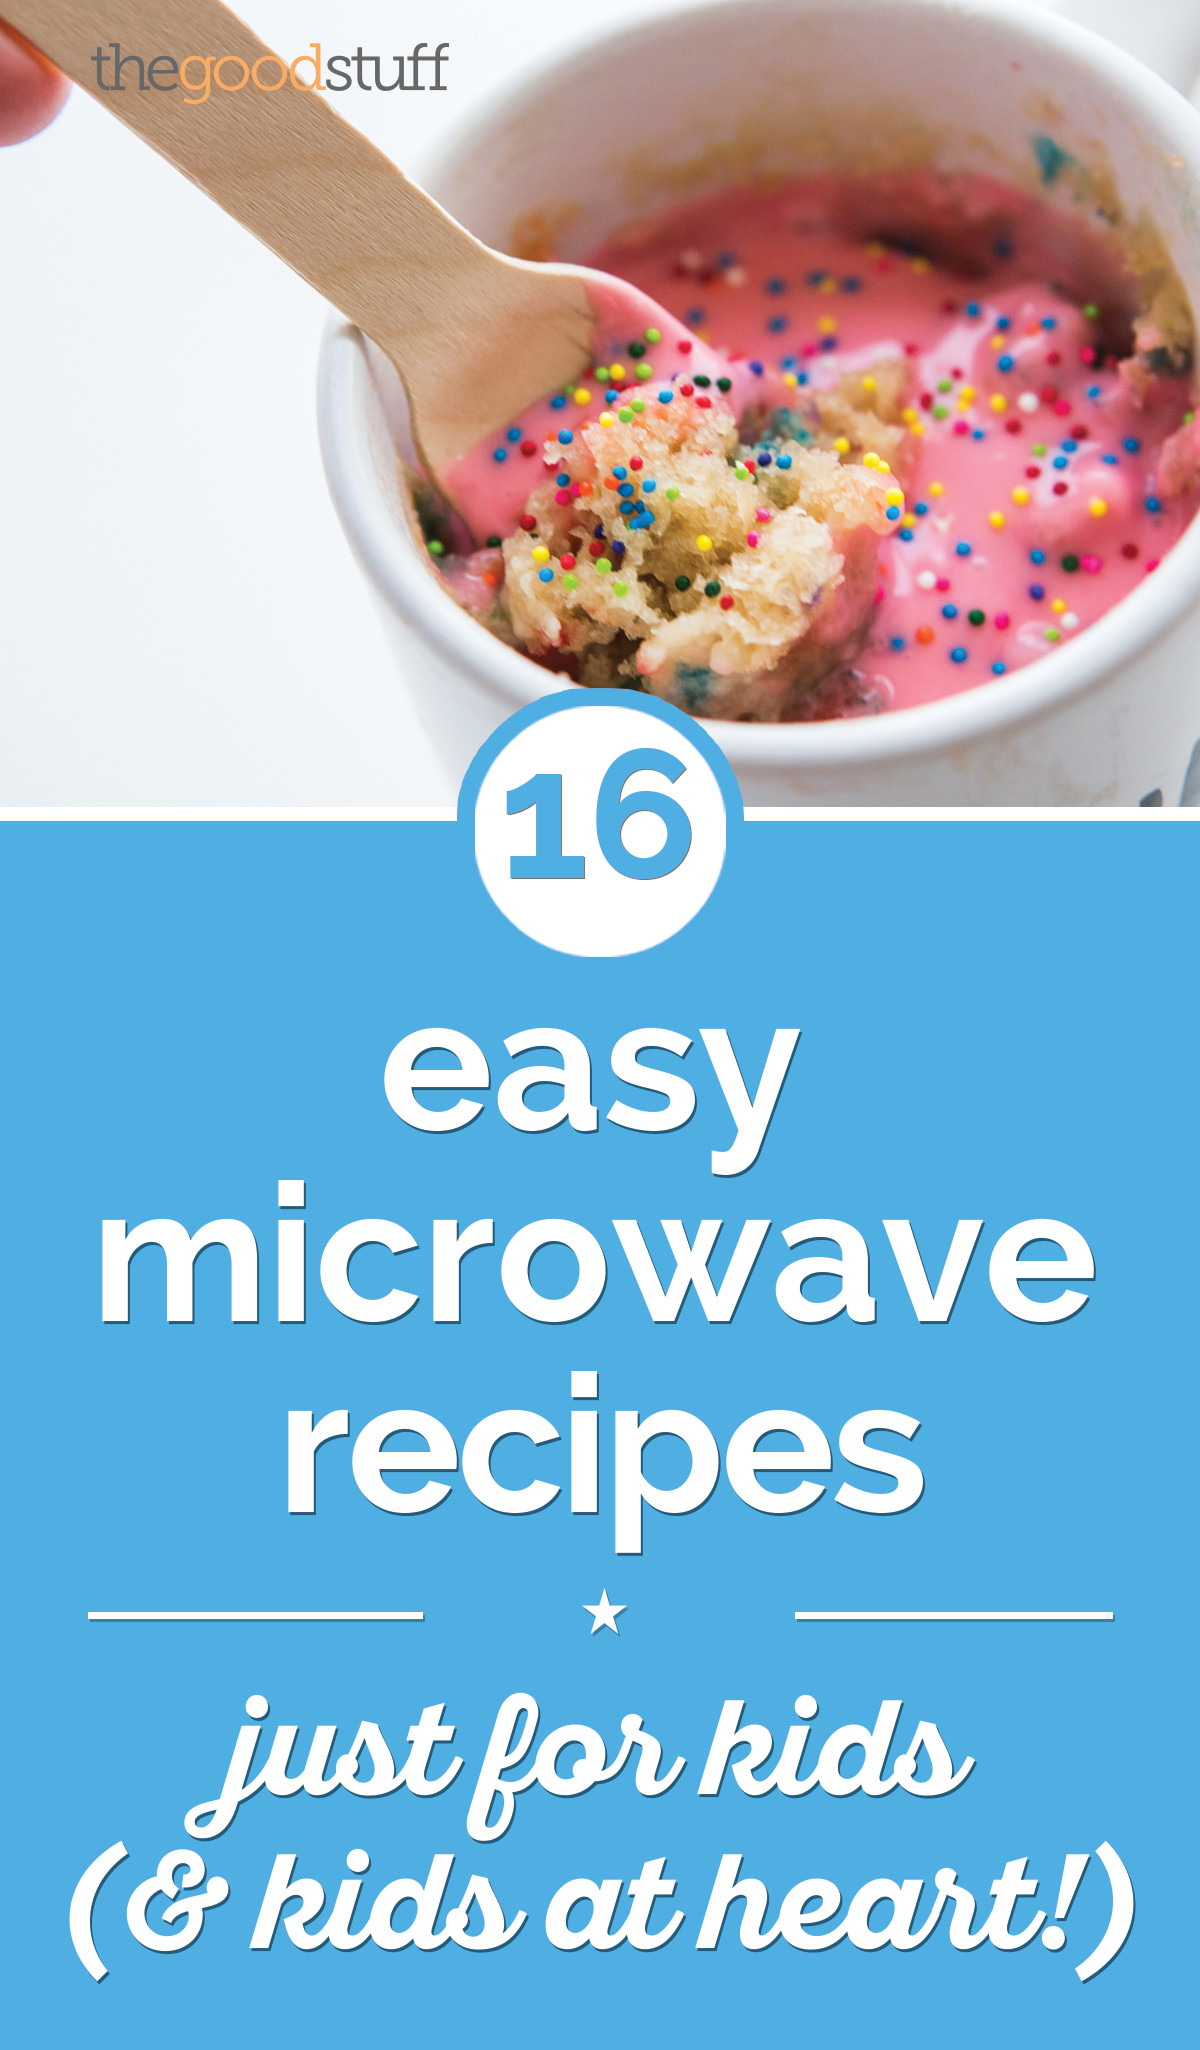 Easy Microwave Recipes For Kids
 16 Easy Microwave Recipes Just for Kids & Kids at Heart